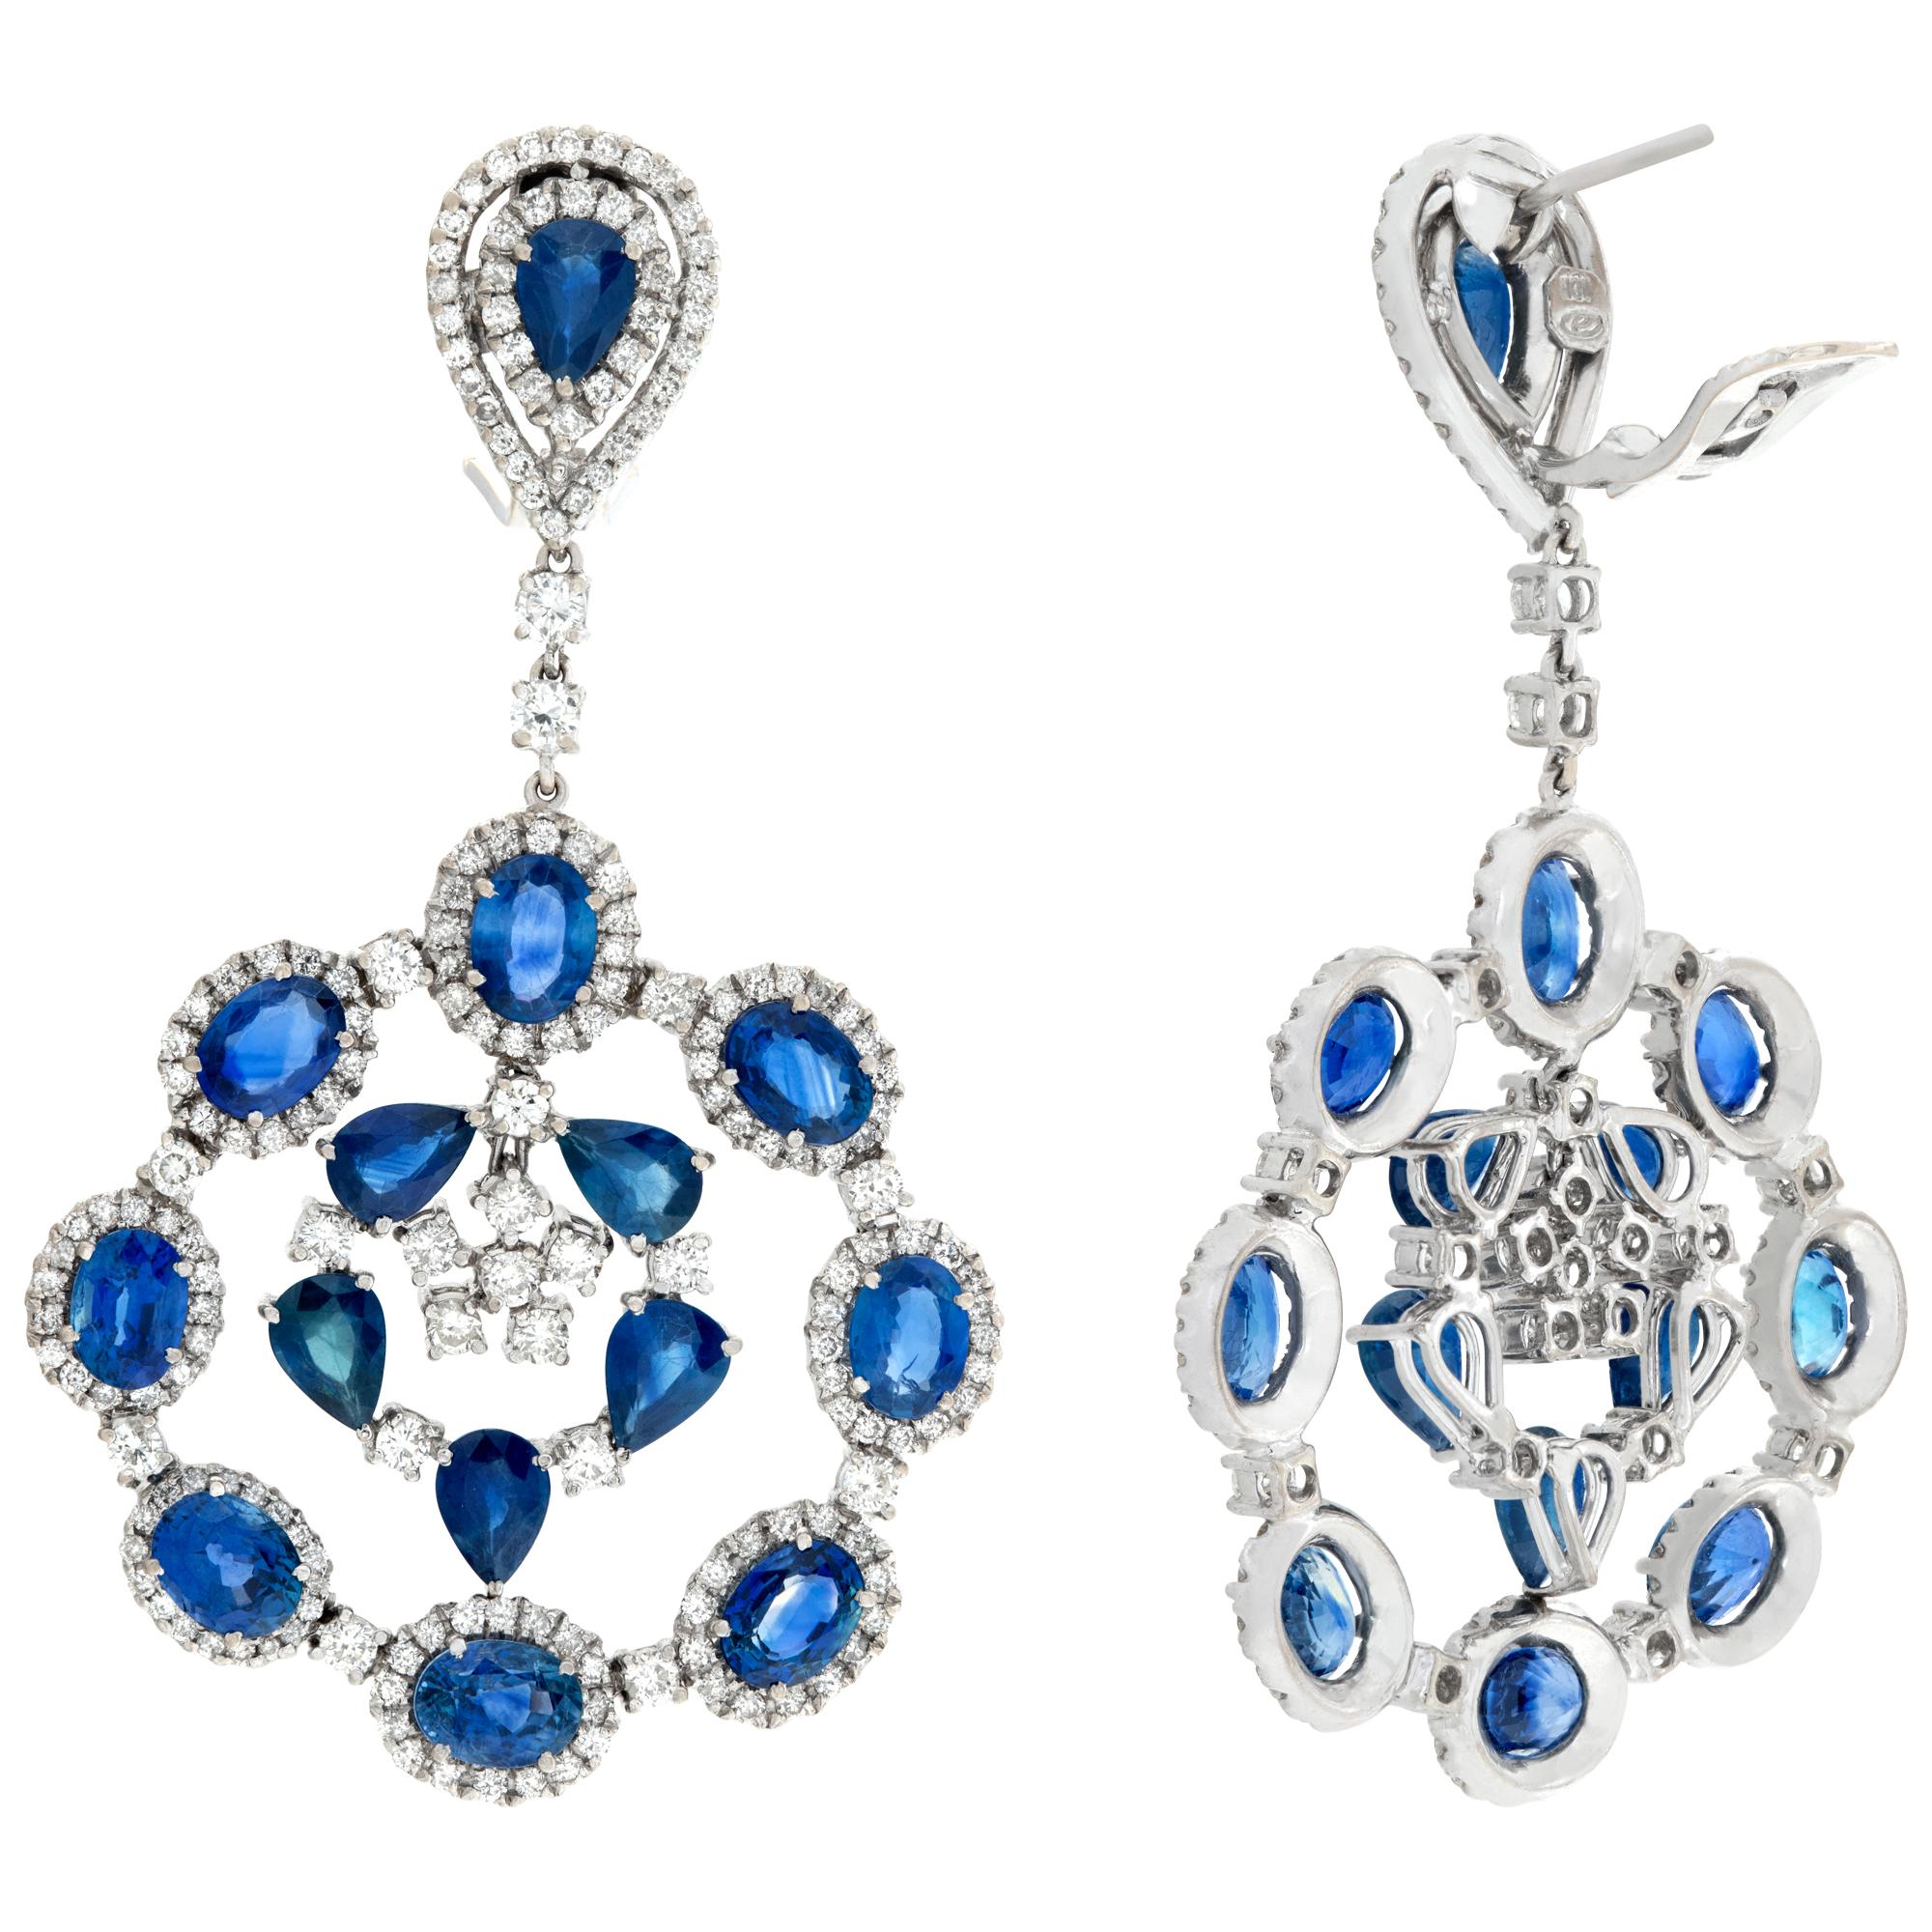 Women's 18k White Gold Drop Earrings with 6.71 Cts in Diamonds and 29.52 Cts in Sapphire